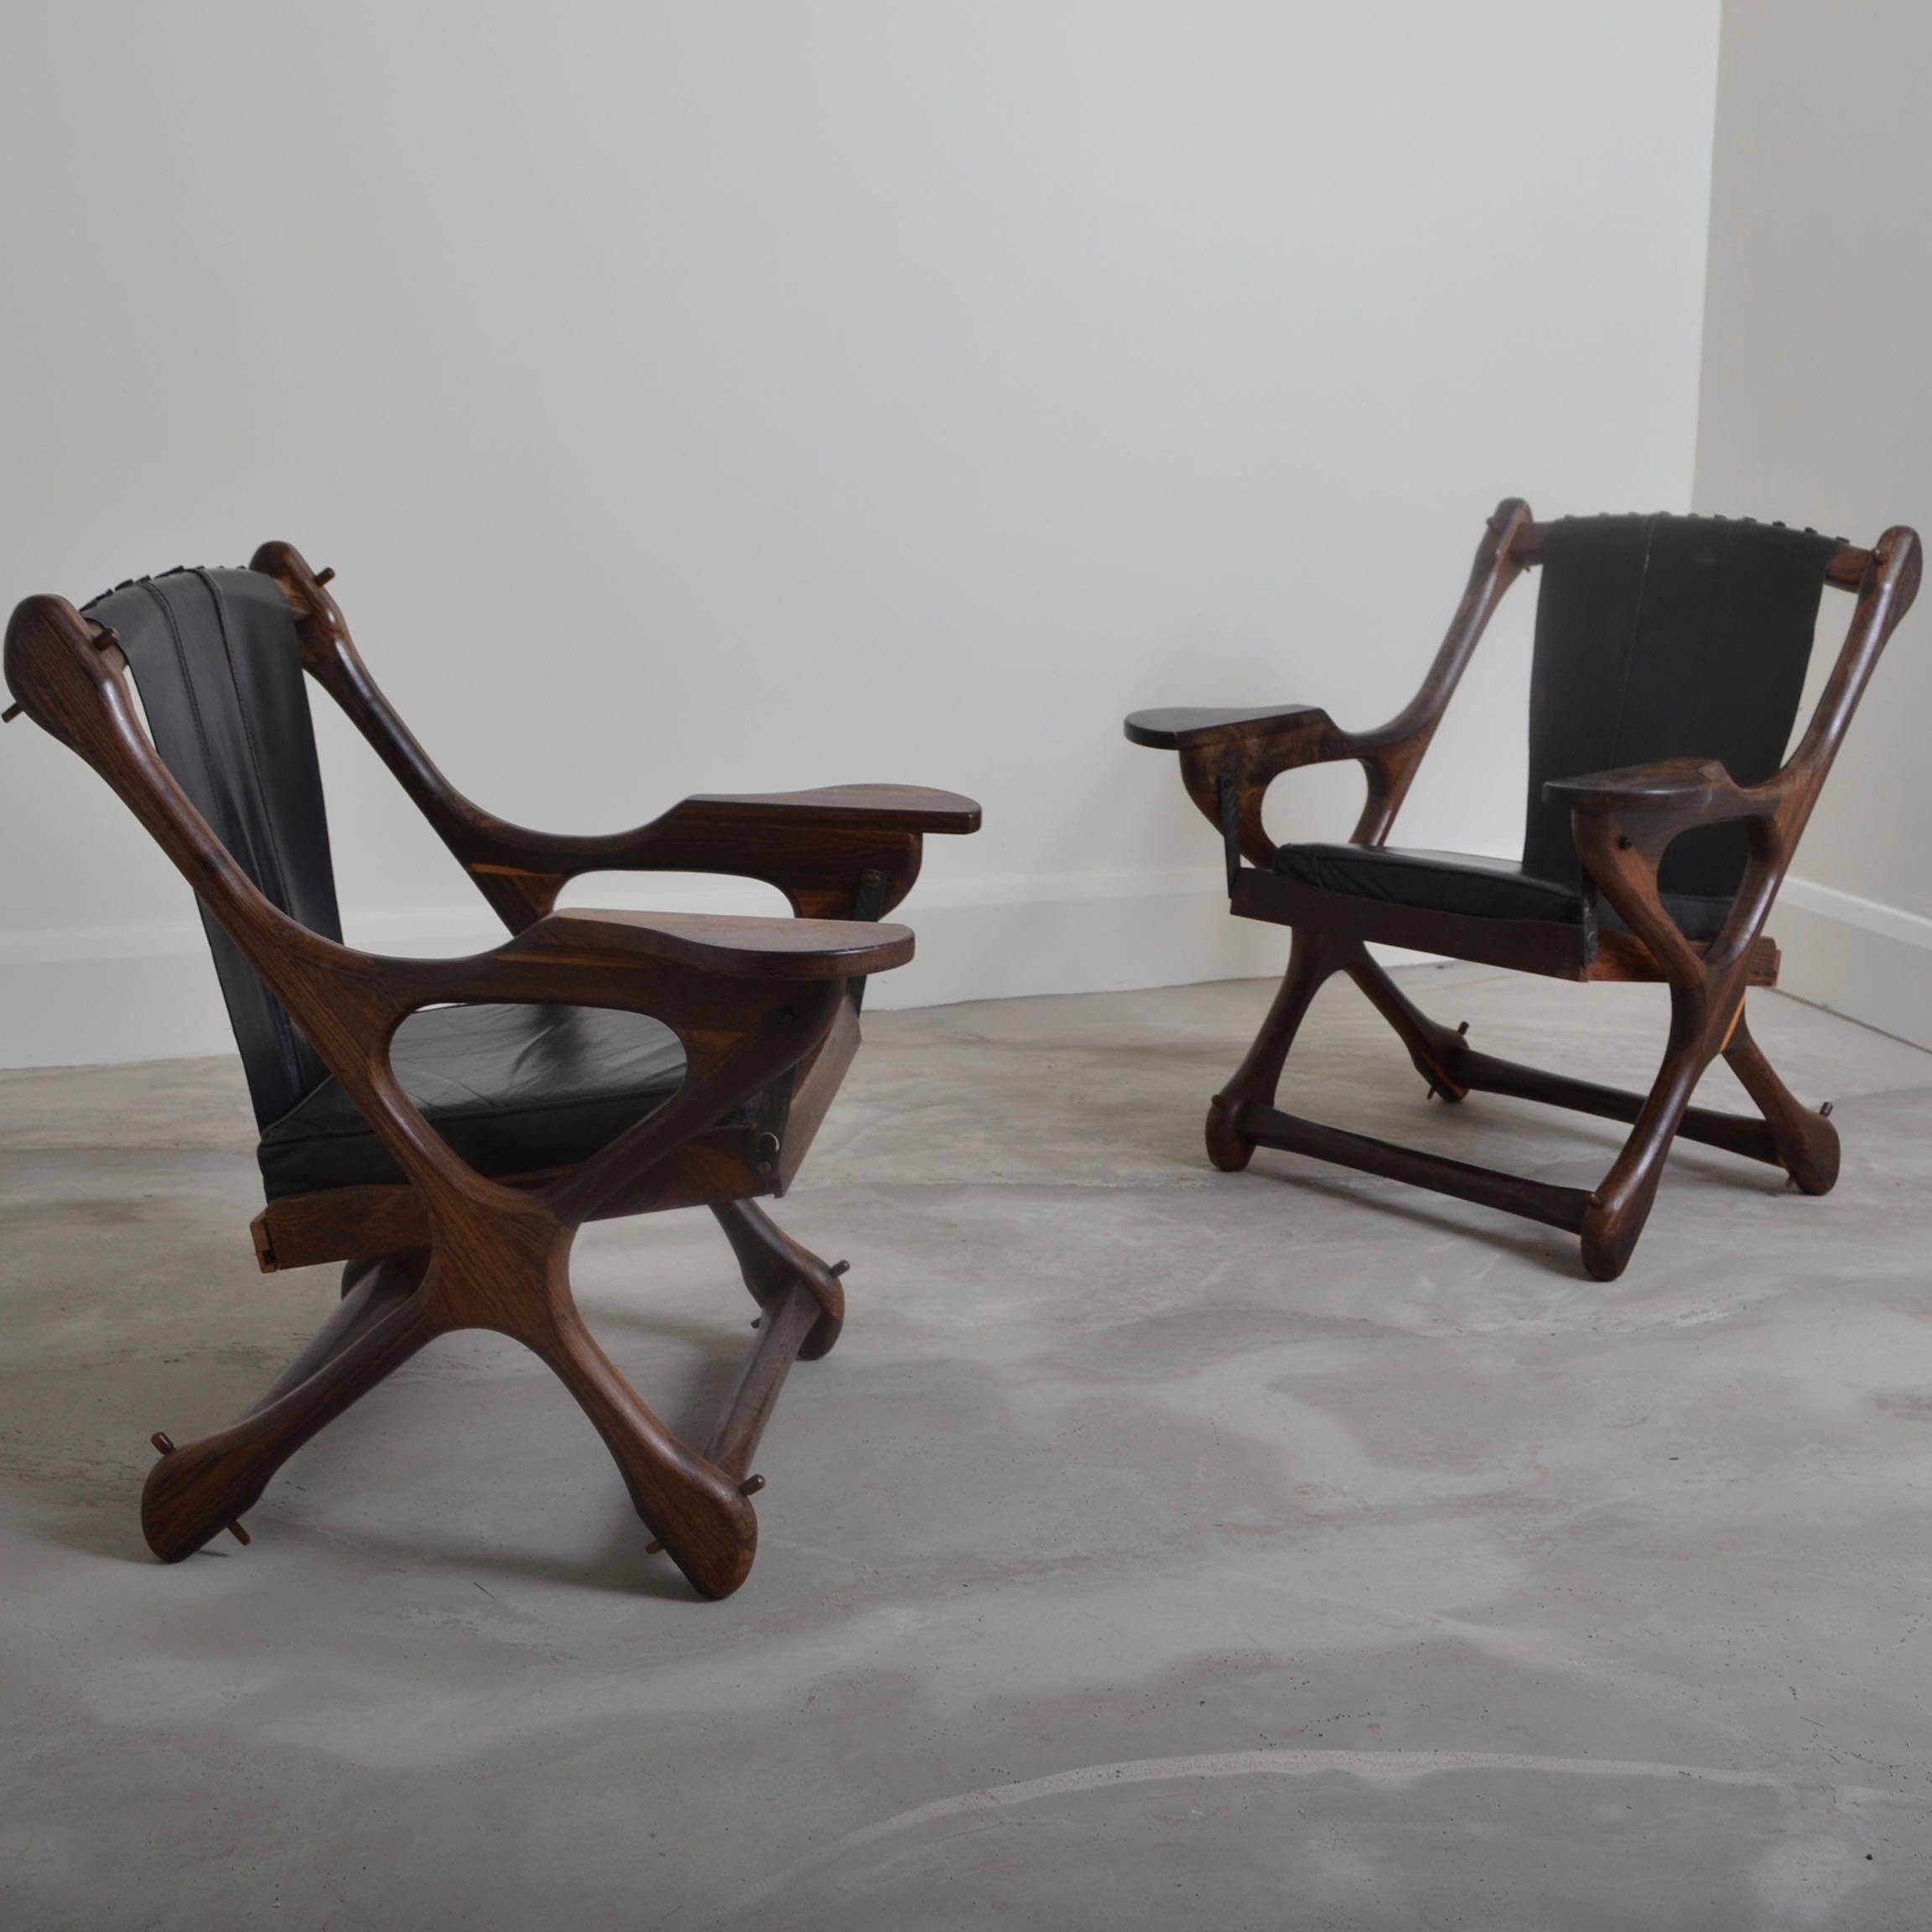 Pair of lounge chairs with rocking seats designed by Don Shoemaker. Retaining the original "Senal, Mexico" label.
Cocobolo wood with black leather.